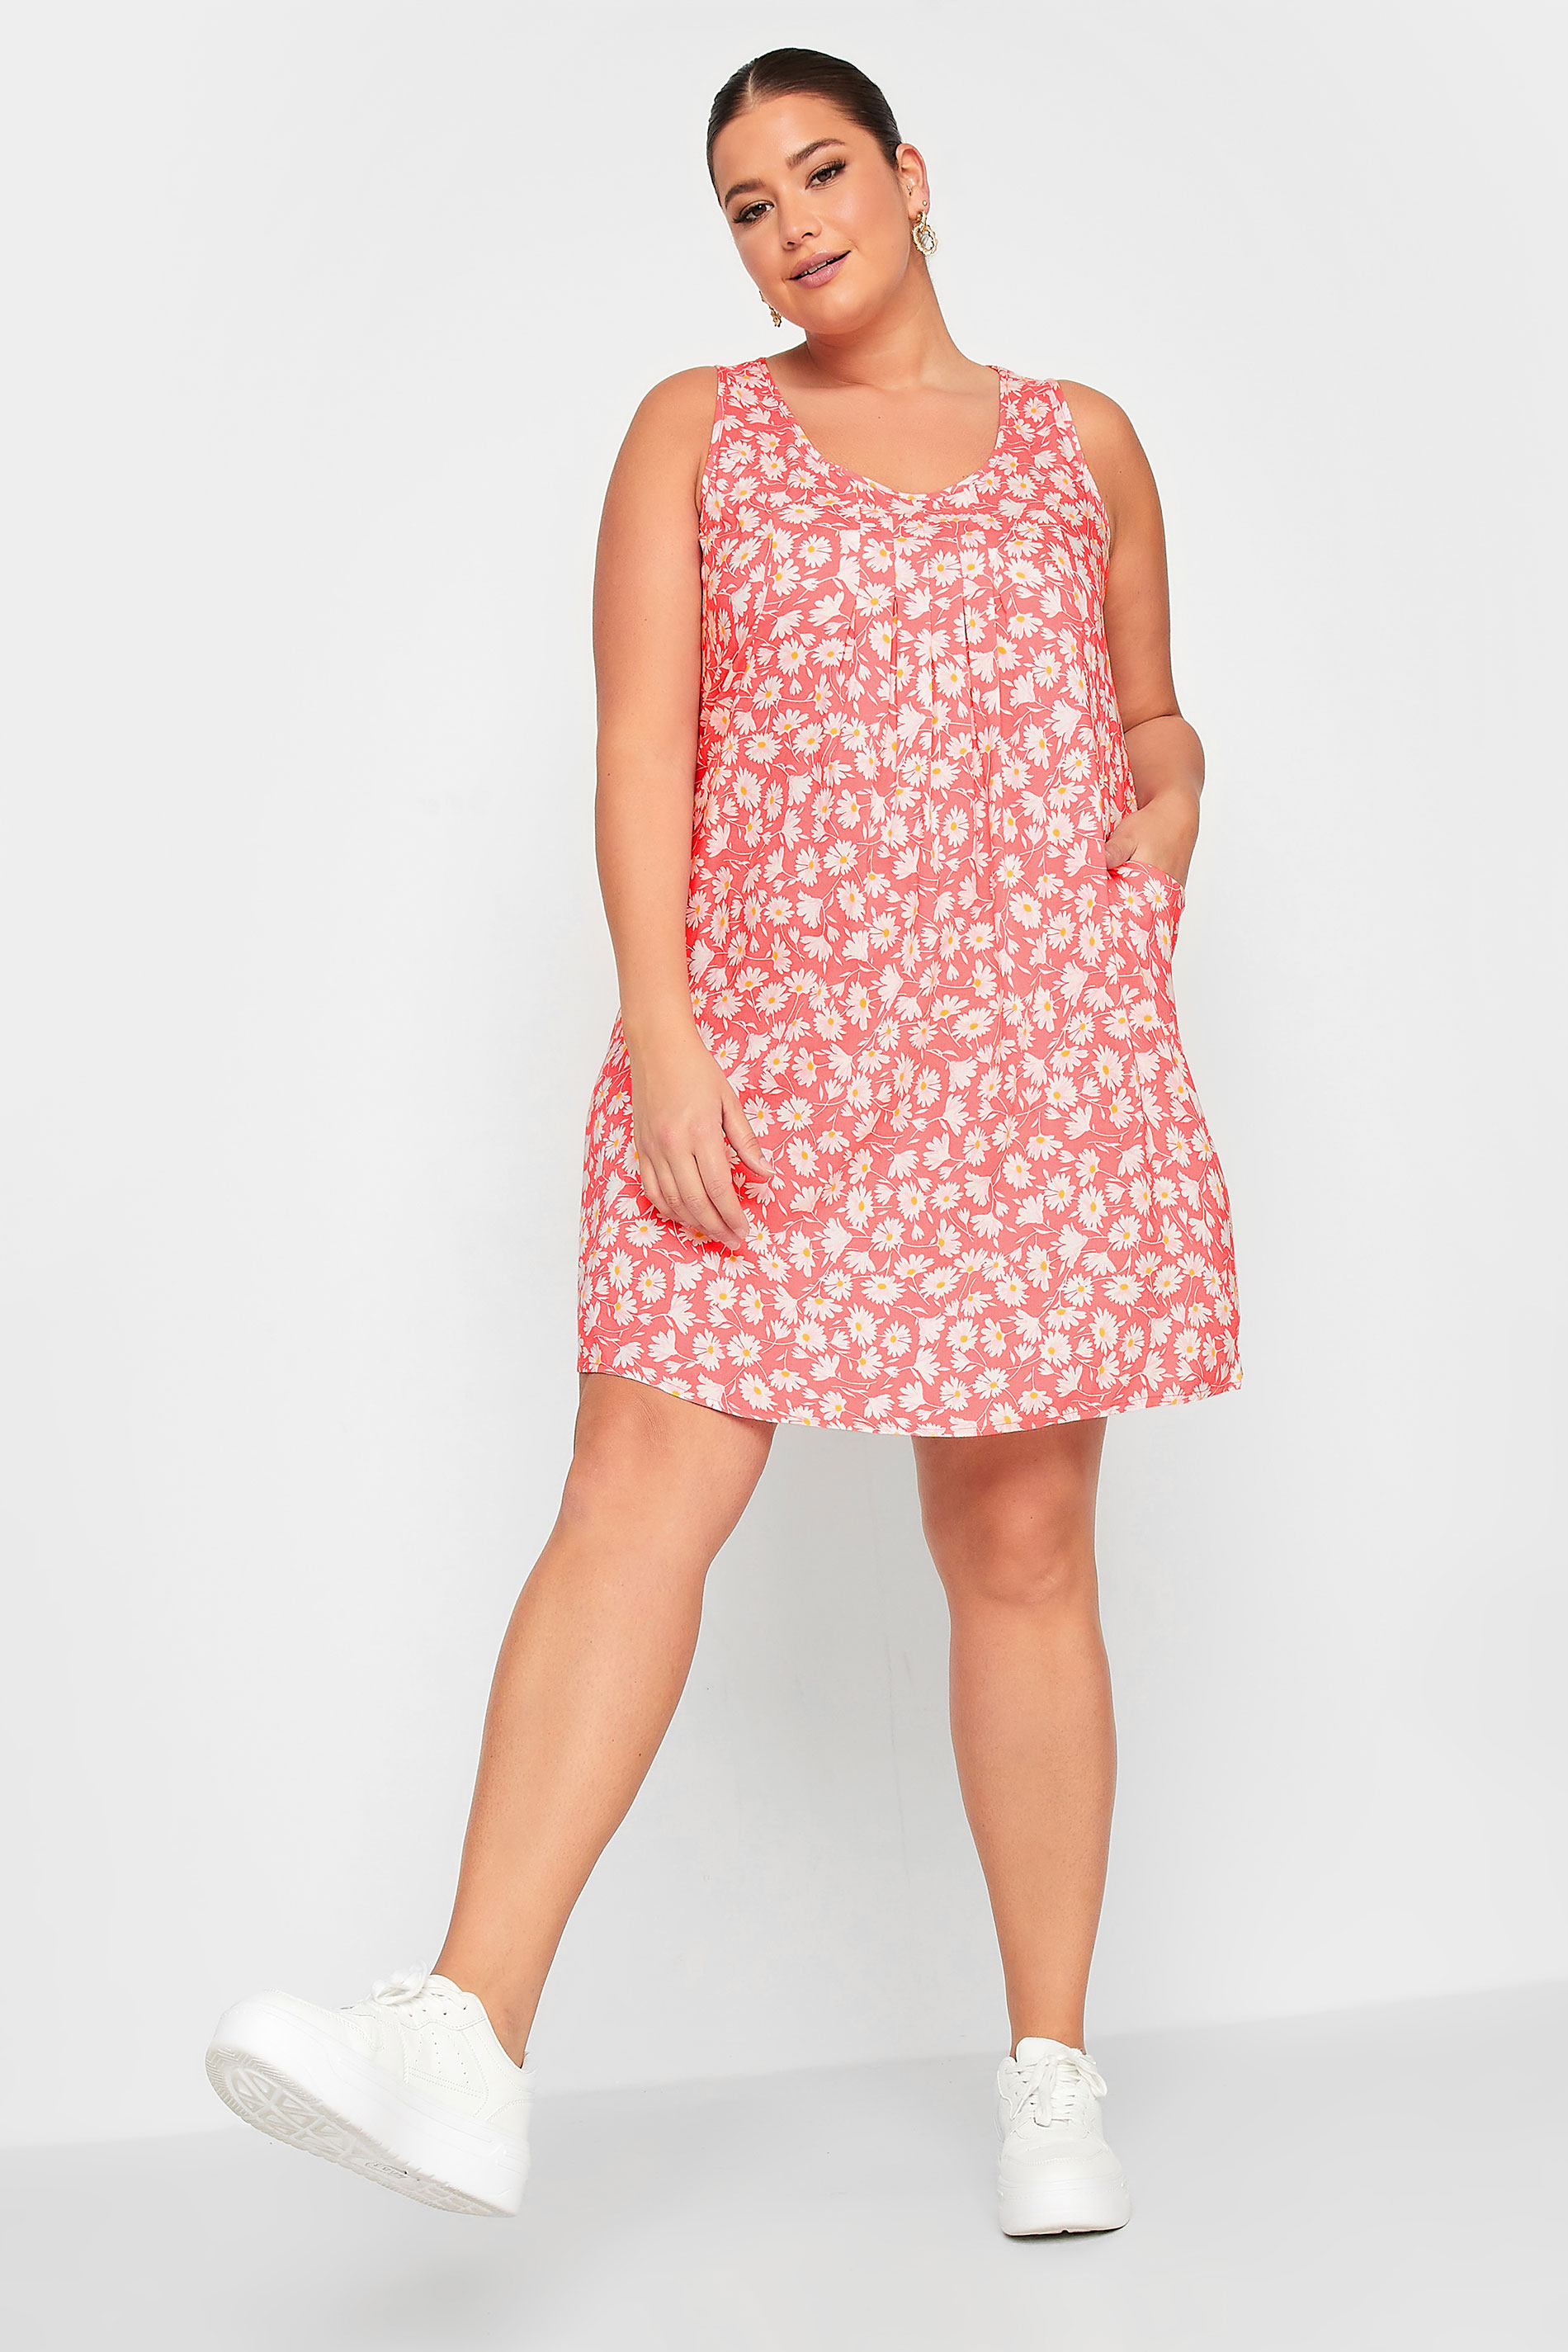 YOURS Plus Size Curve Light Pink Daisy Print Pocket Smock Dress | Yours Clothing  2